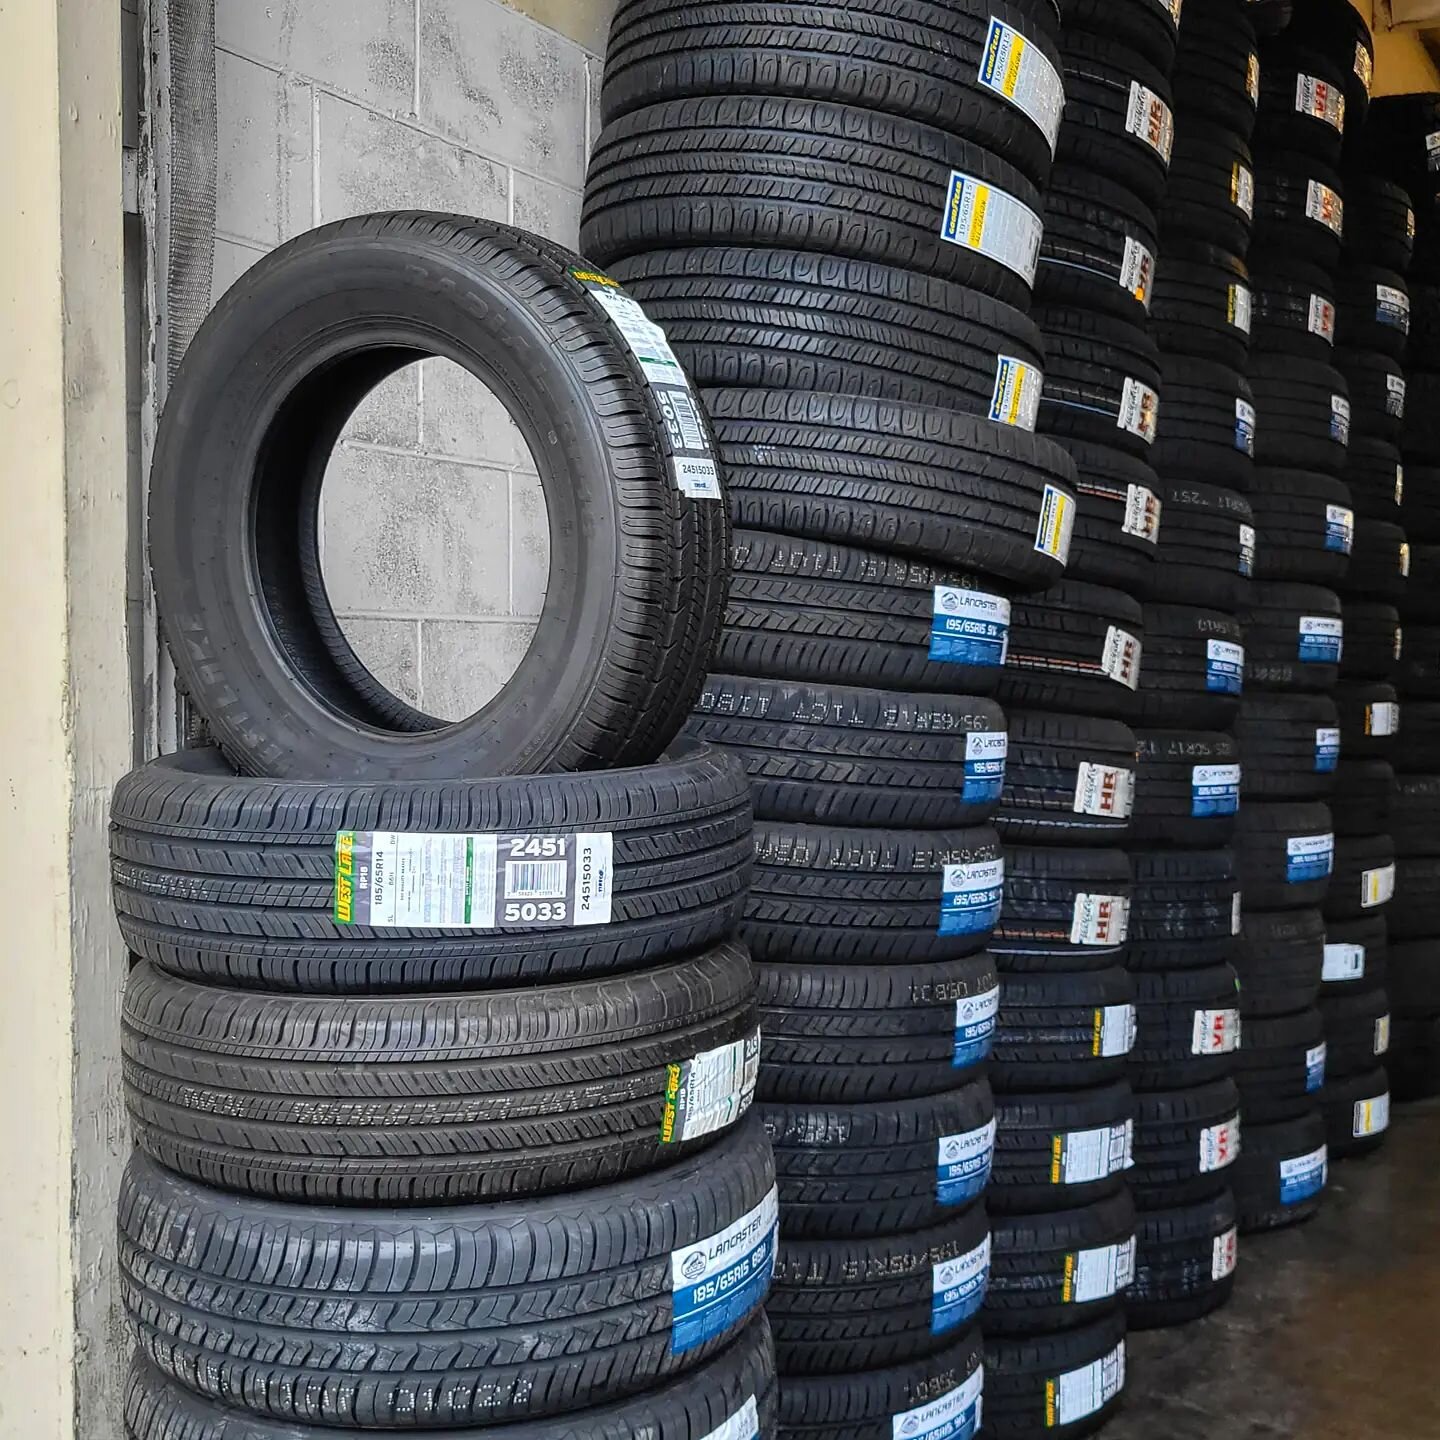 The rain's coming - is your car ready? Lots of new tires here to make sure you get around safely. If we don't have your preferred tire in store, give us a call or send a DM for a quote on other tire options! #tiresquad #tiresquadwestminster